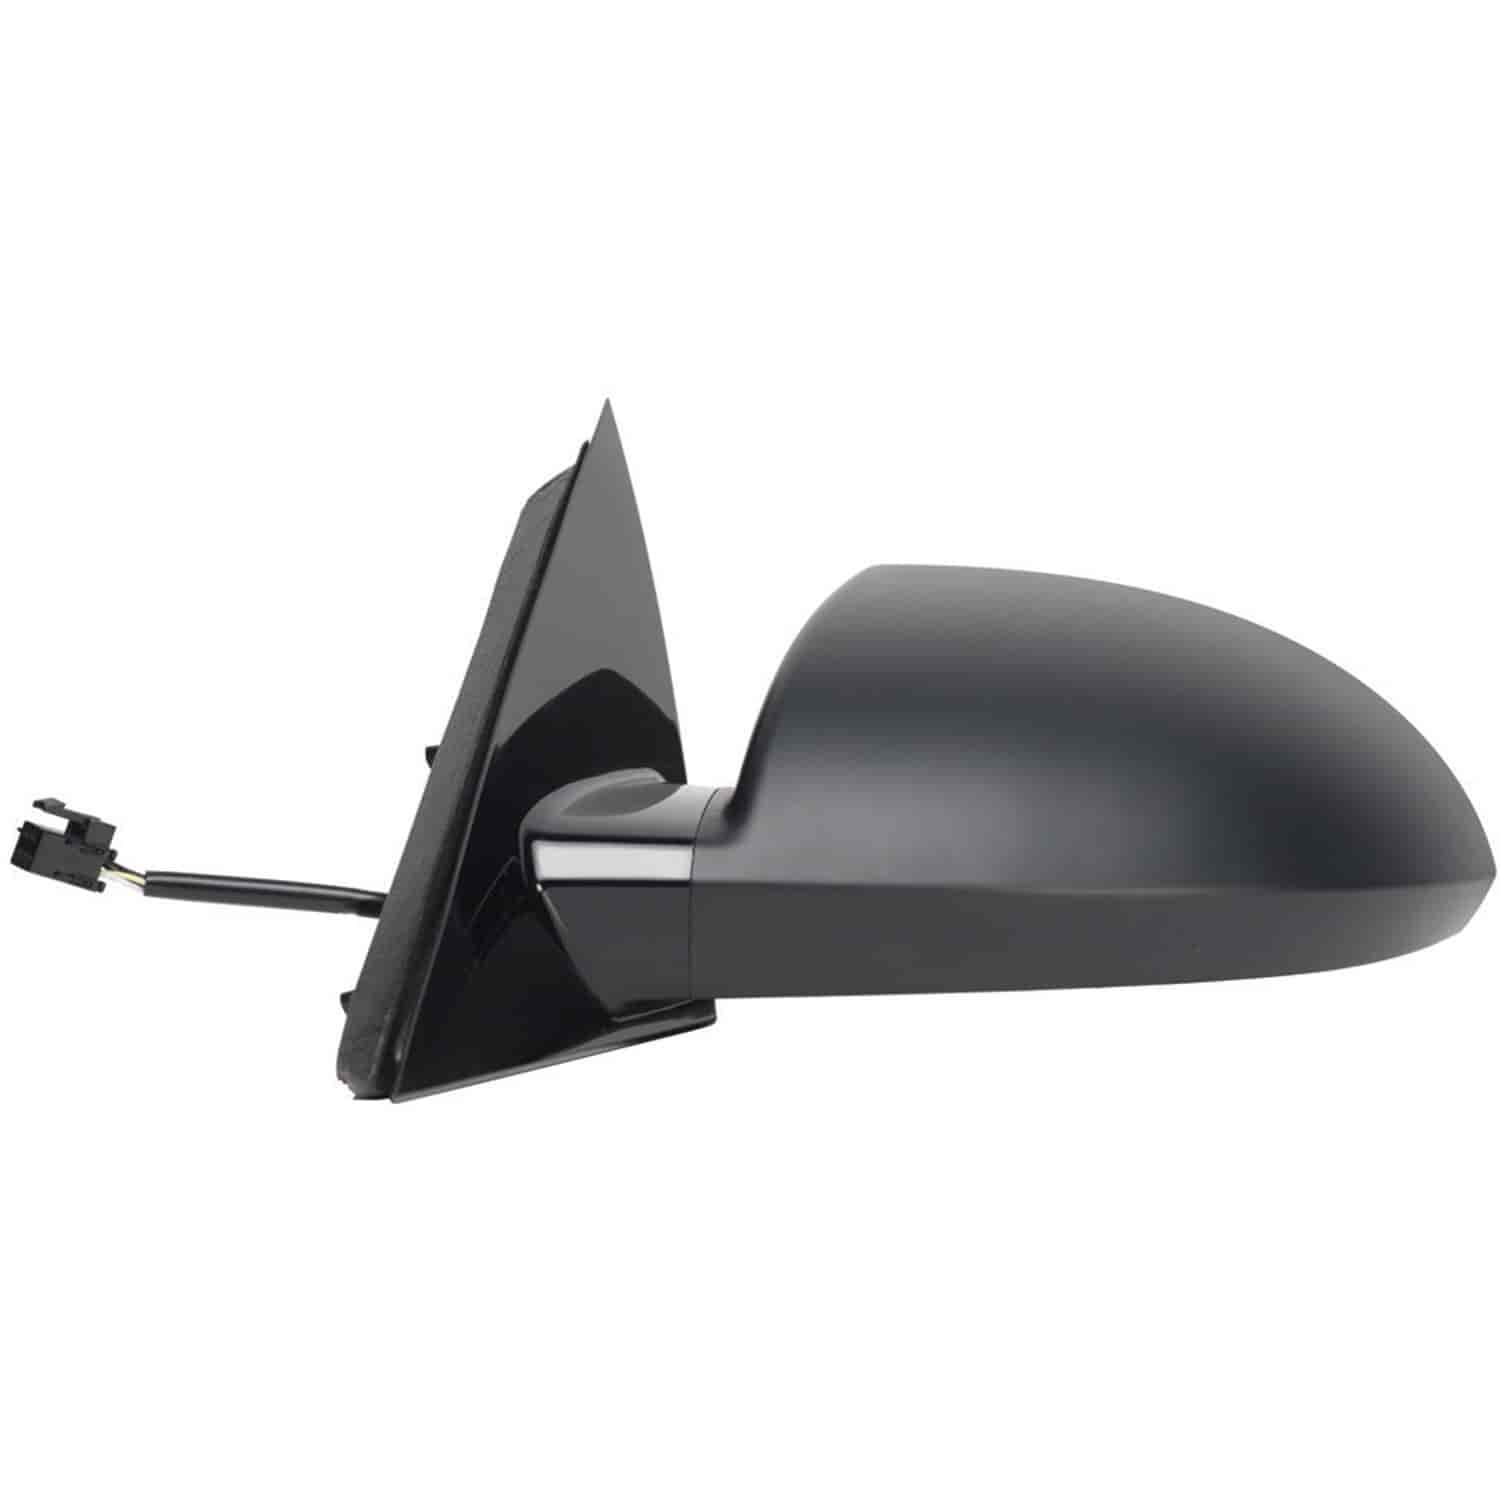 OEM Style Replacement mirror for 06-14 Chevy Impala